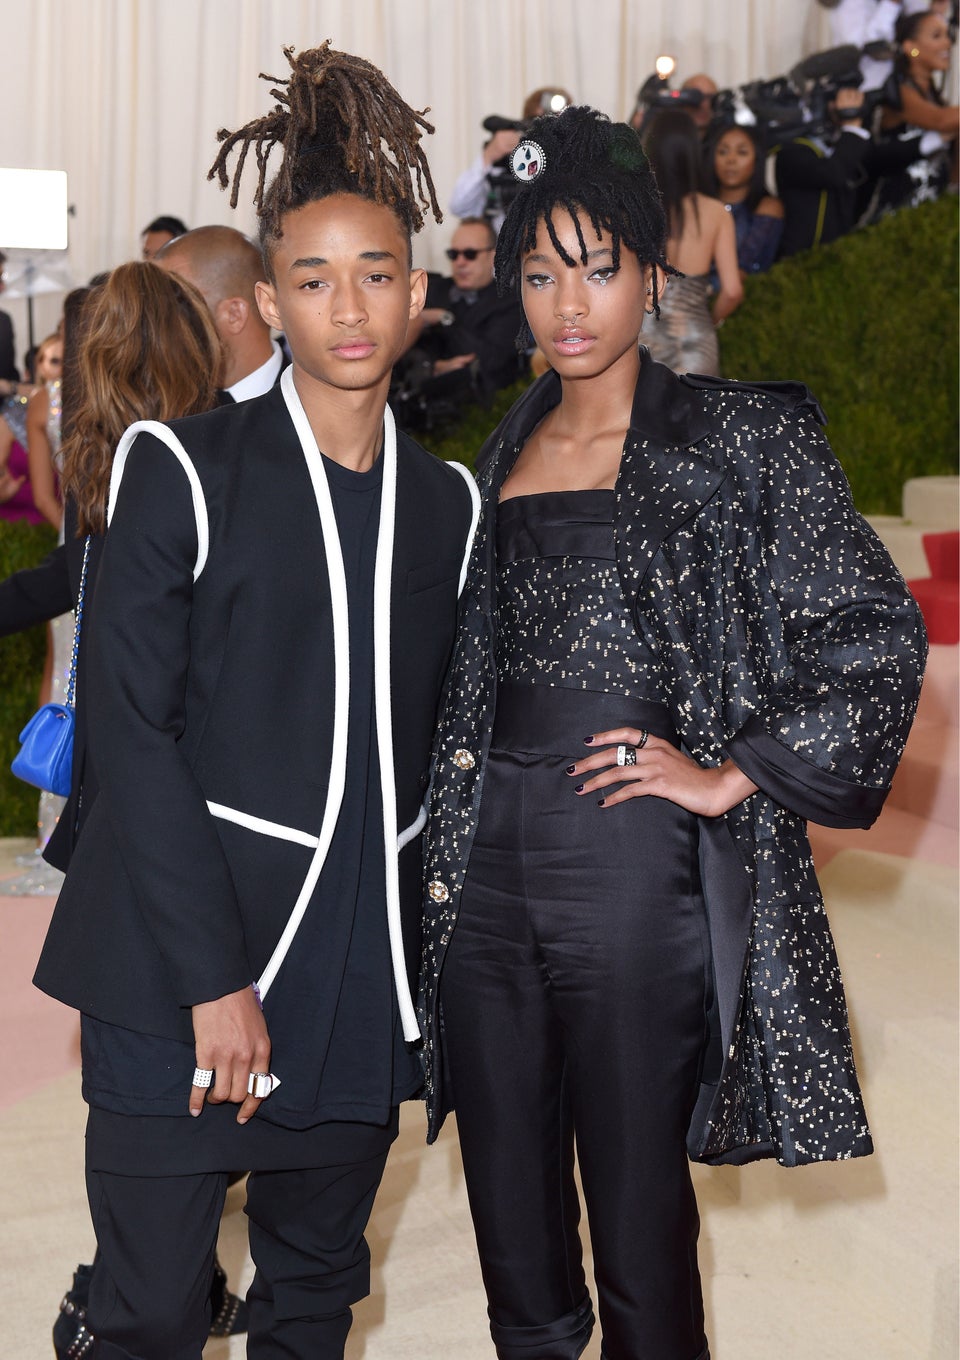 How Jaden and Willow Smith Feel About Dad’s ‘Suicide Squad’ Role